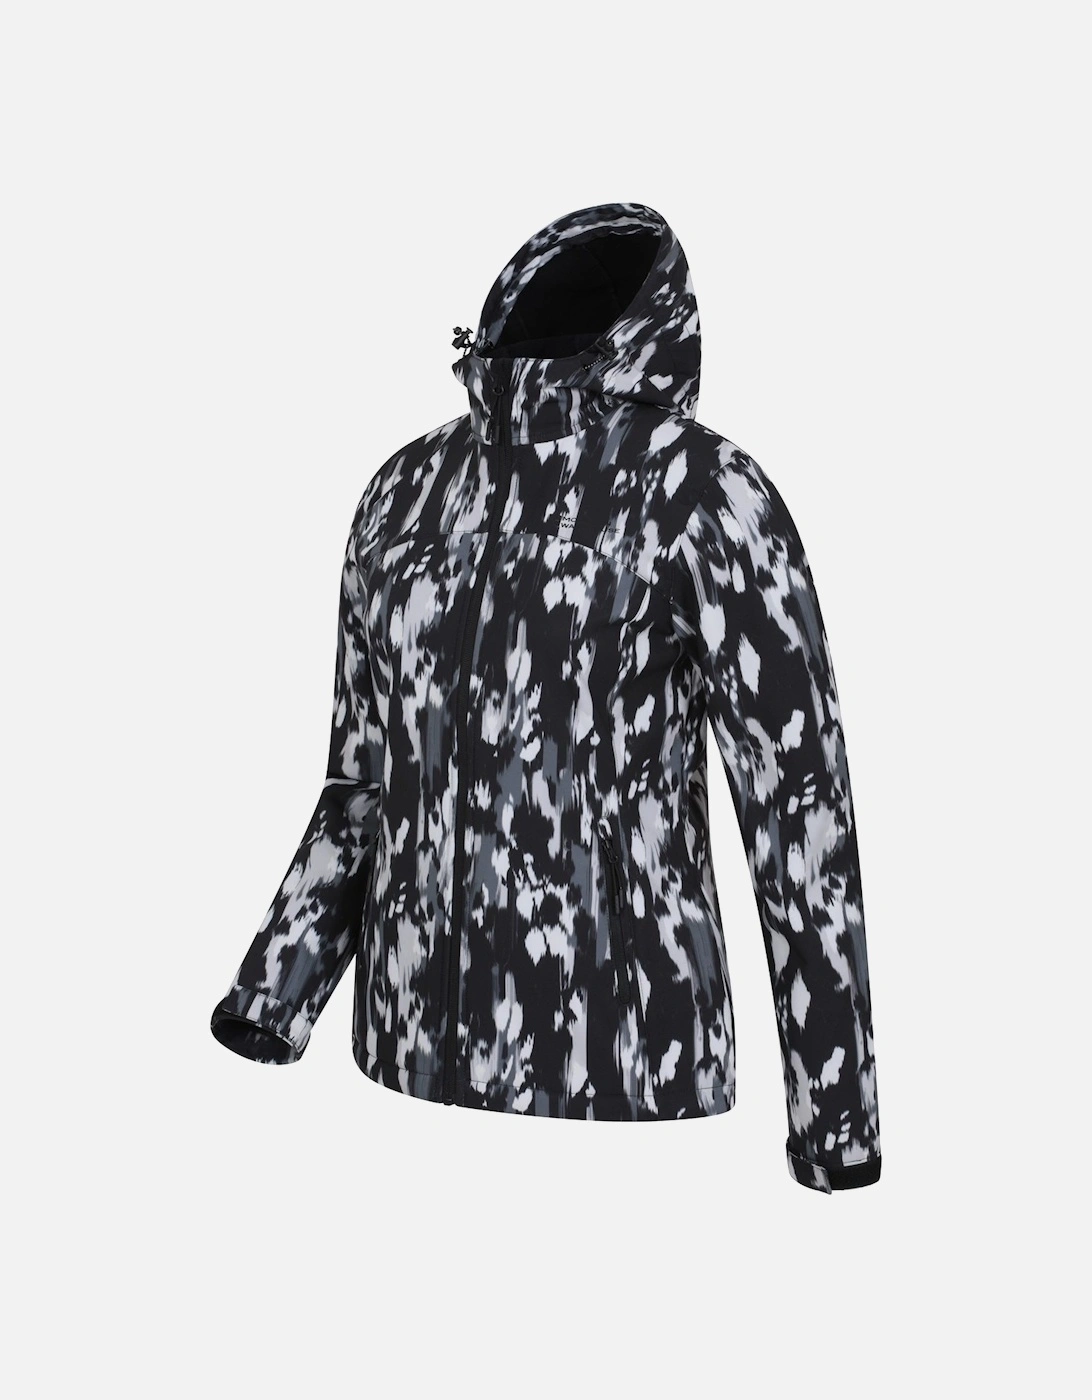 Womens/Ladies Printed Water Resistant Soft Shell Jacket